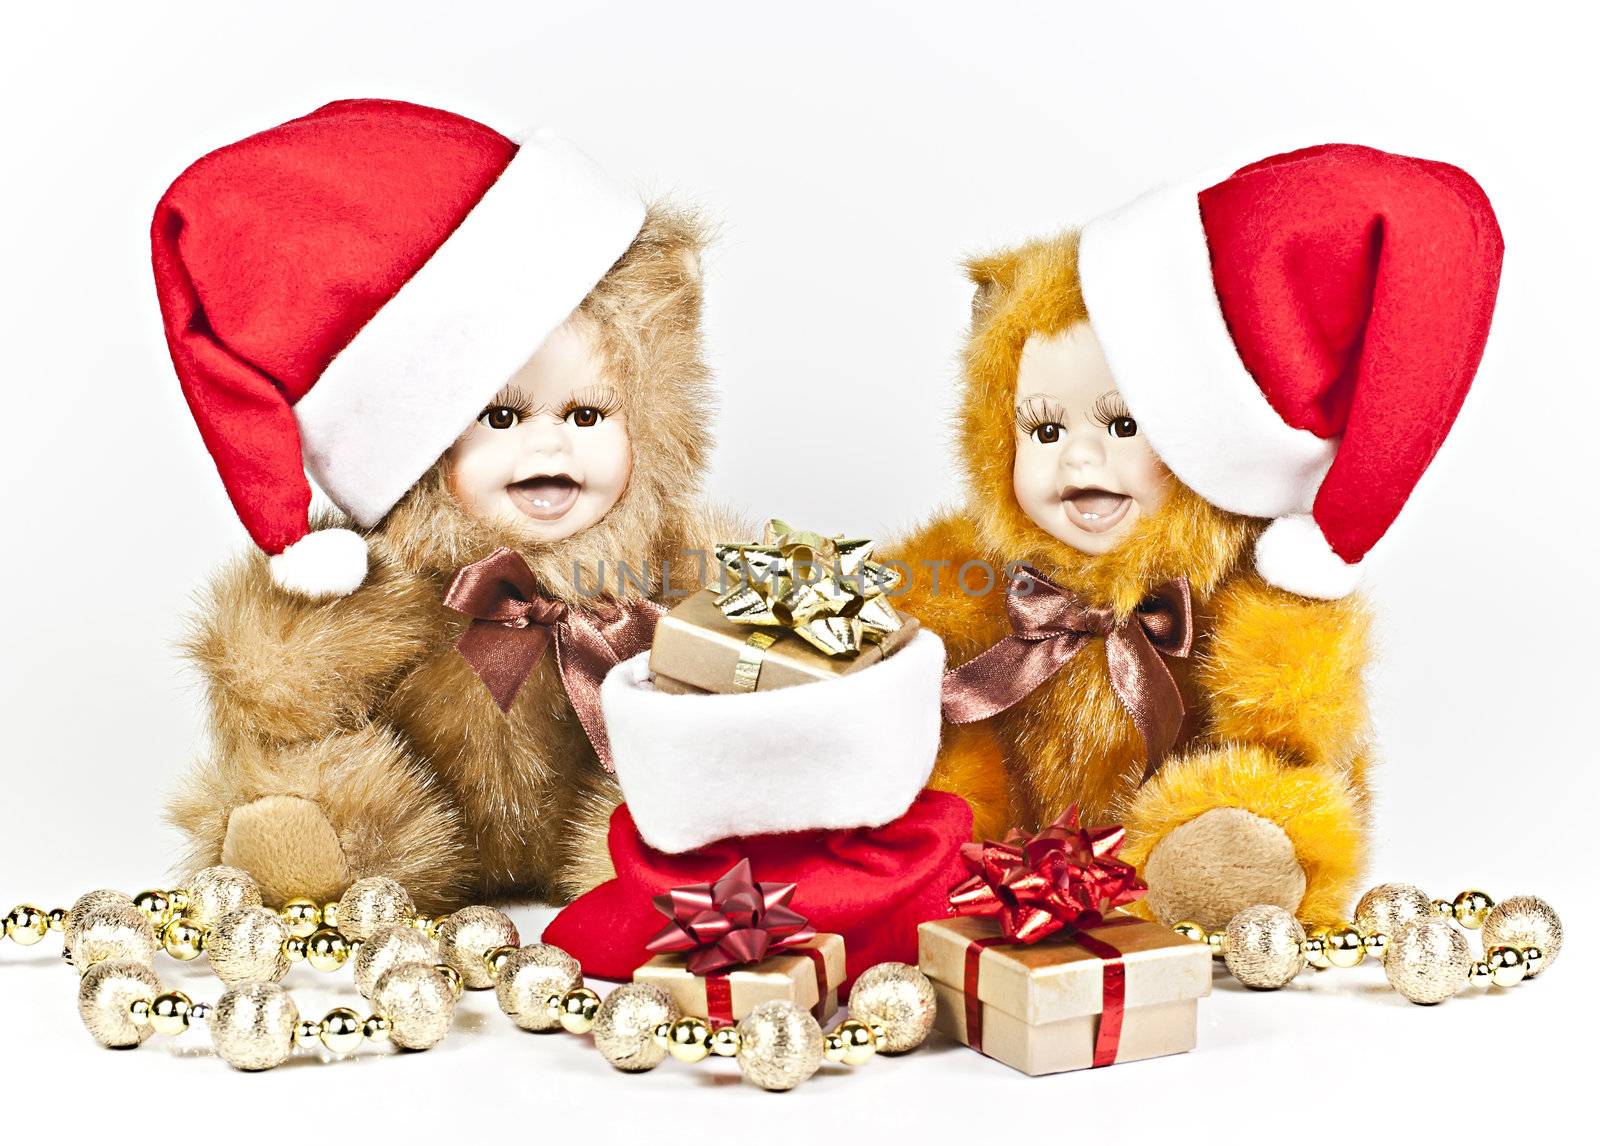 On a white background are two porcelain bears a Christmas gift bag and a golden ball strings.
